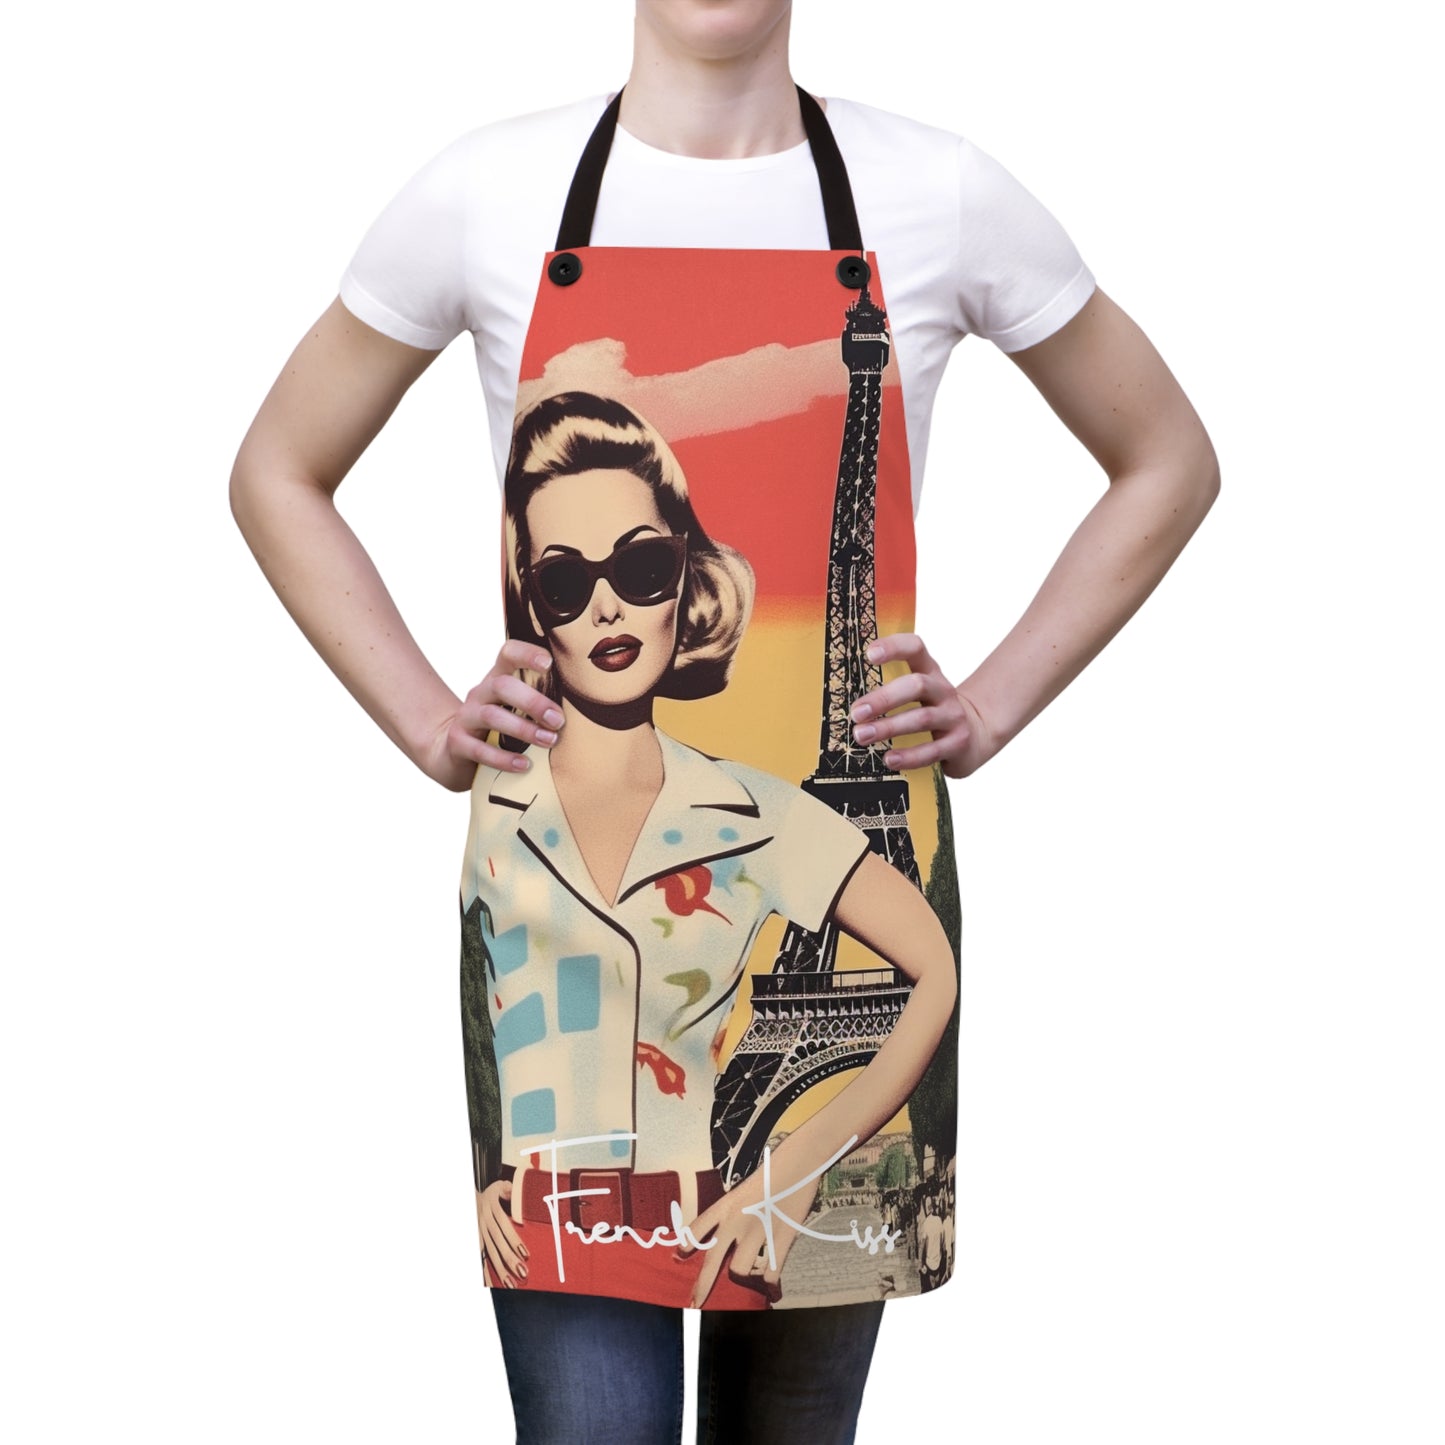 TRES PARIS Chef APRON, French Couture, Pop Art, Travel, Fashion, Gourmet, Cuisine, Cook, France, must have gift item